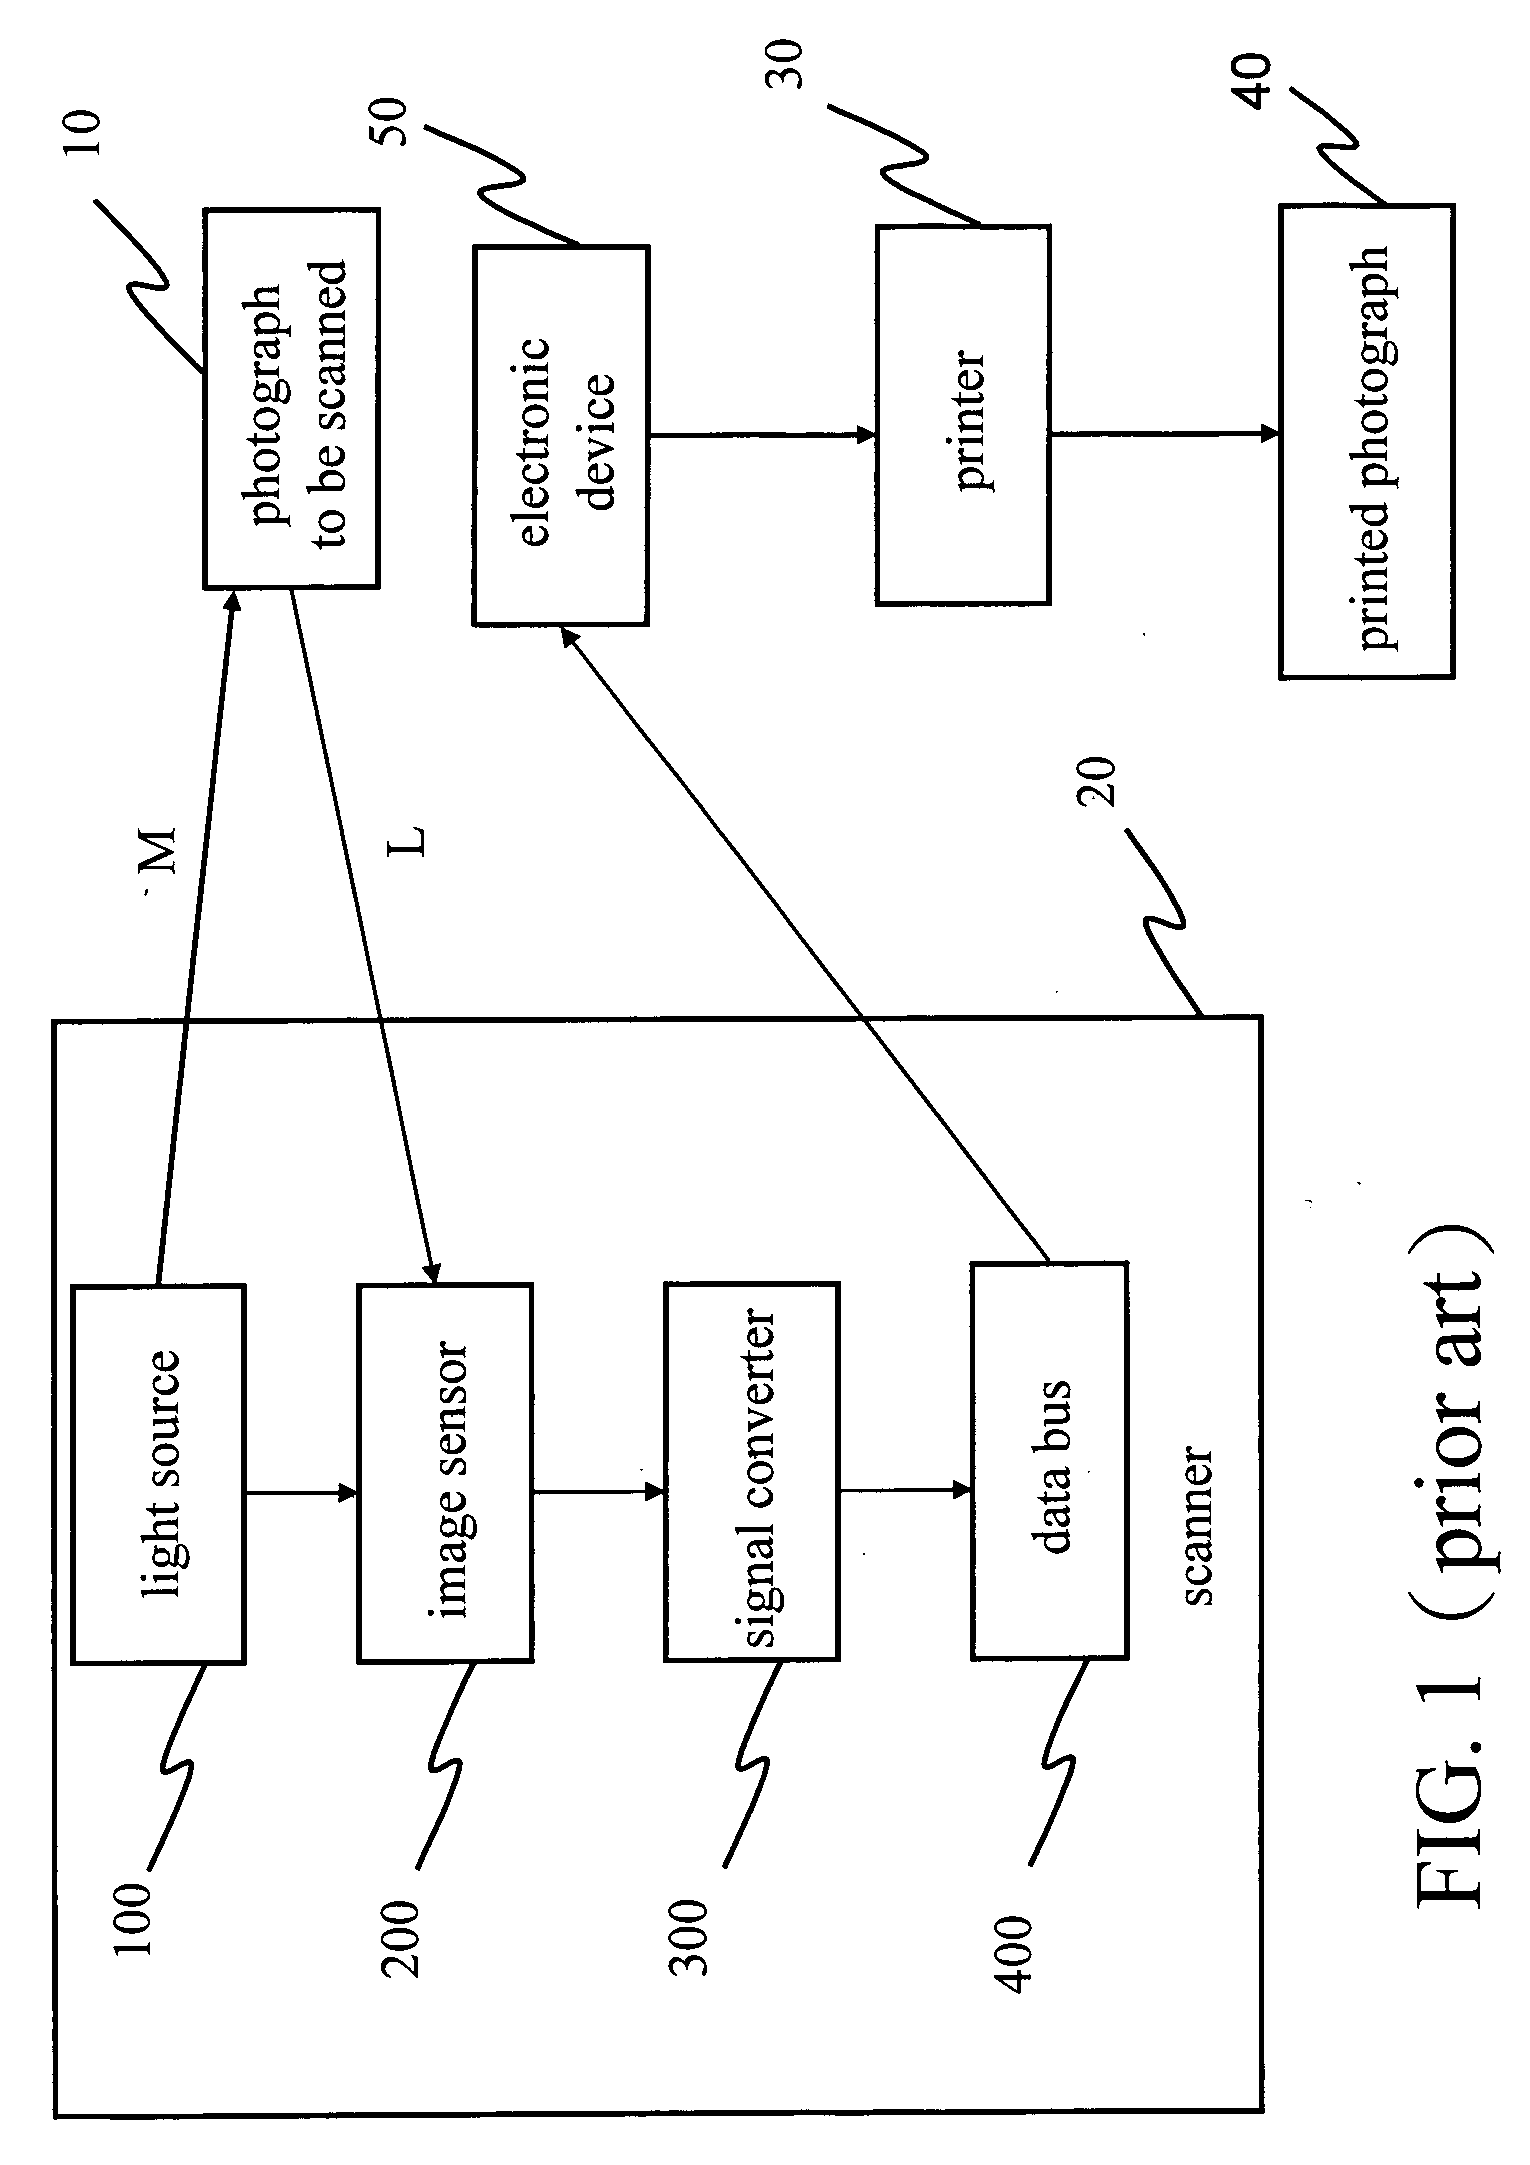 Apparatus for scanning photograph